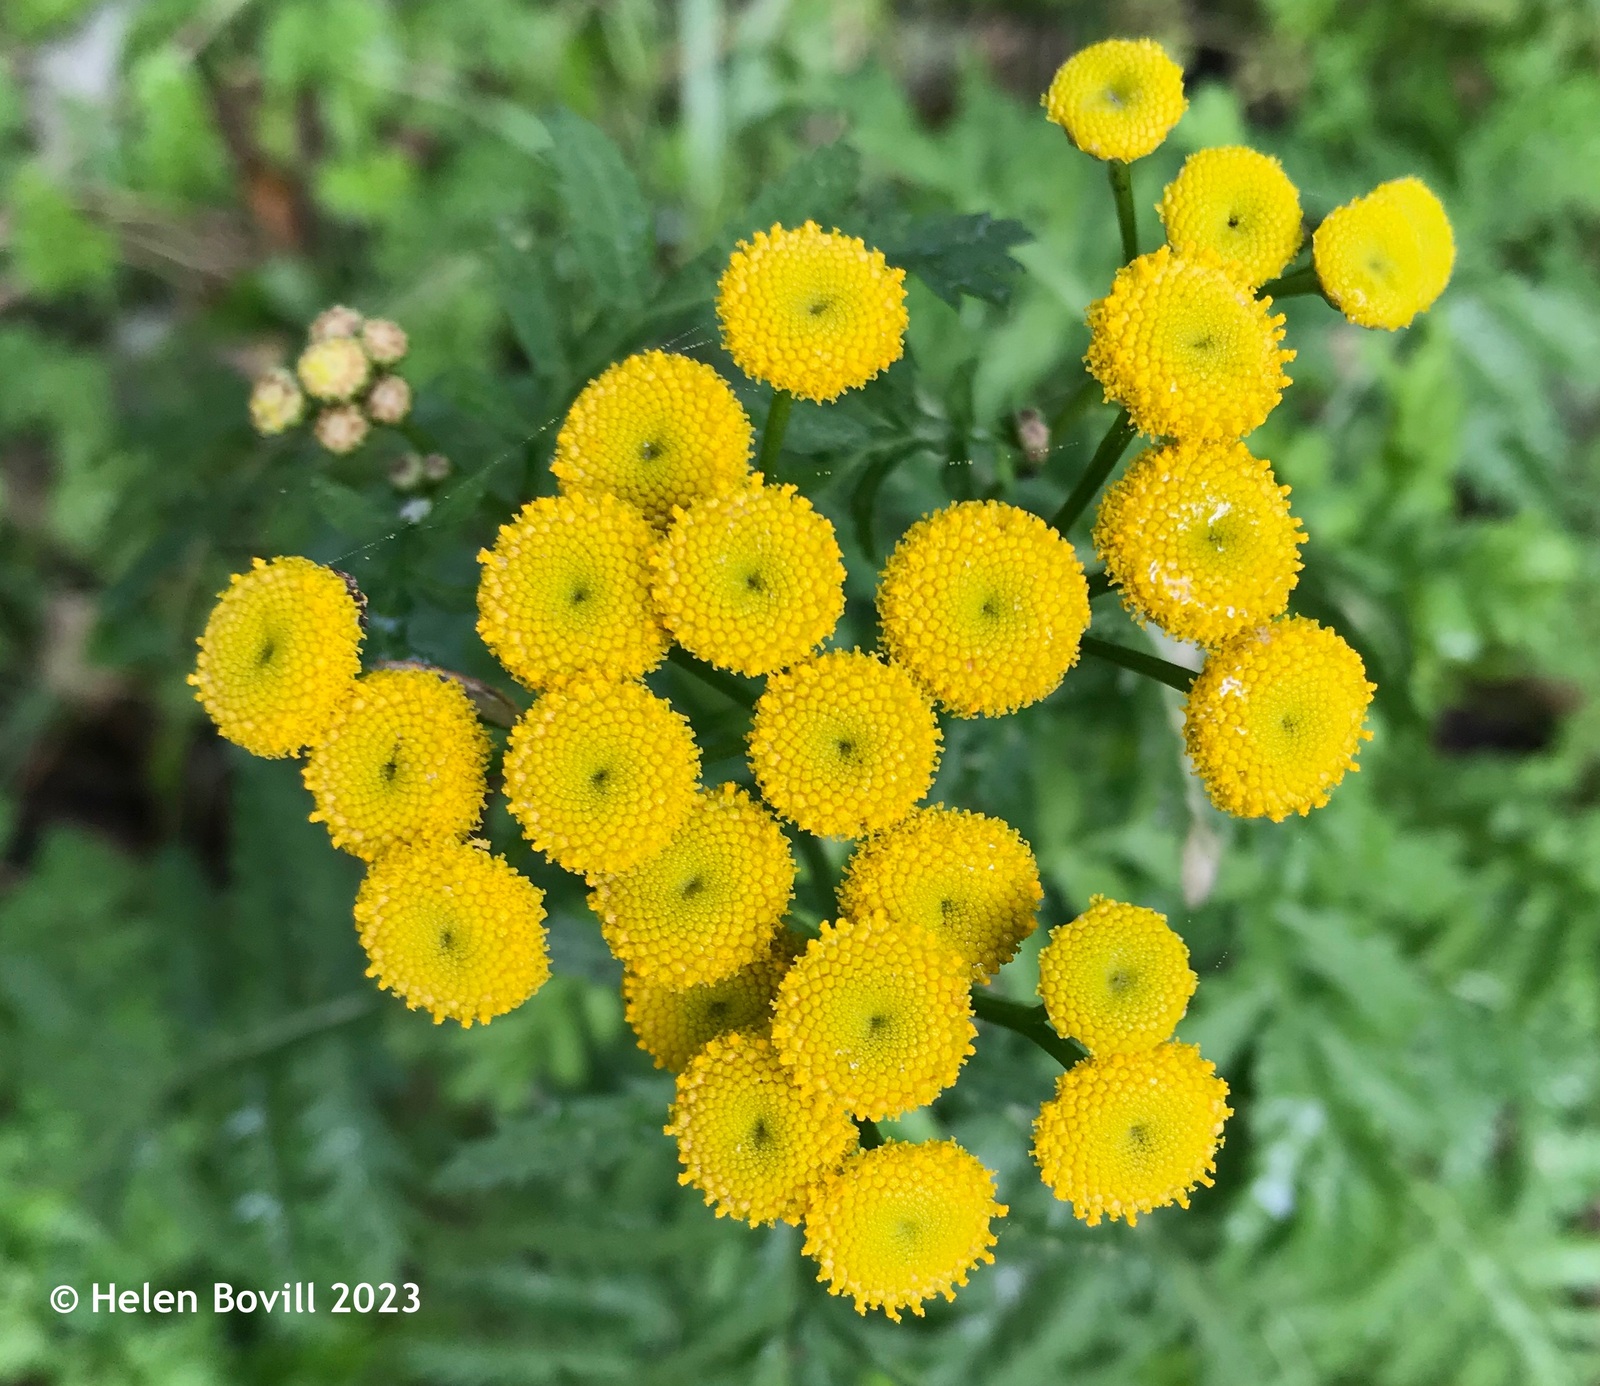 Bright yellow Tansy flowers on the grass verge alongside the cemetery